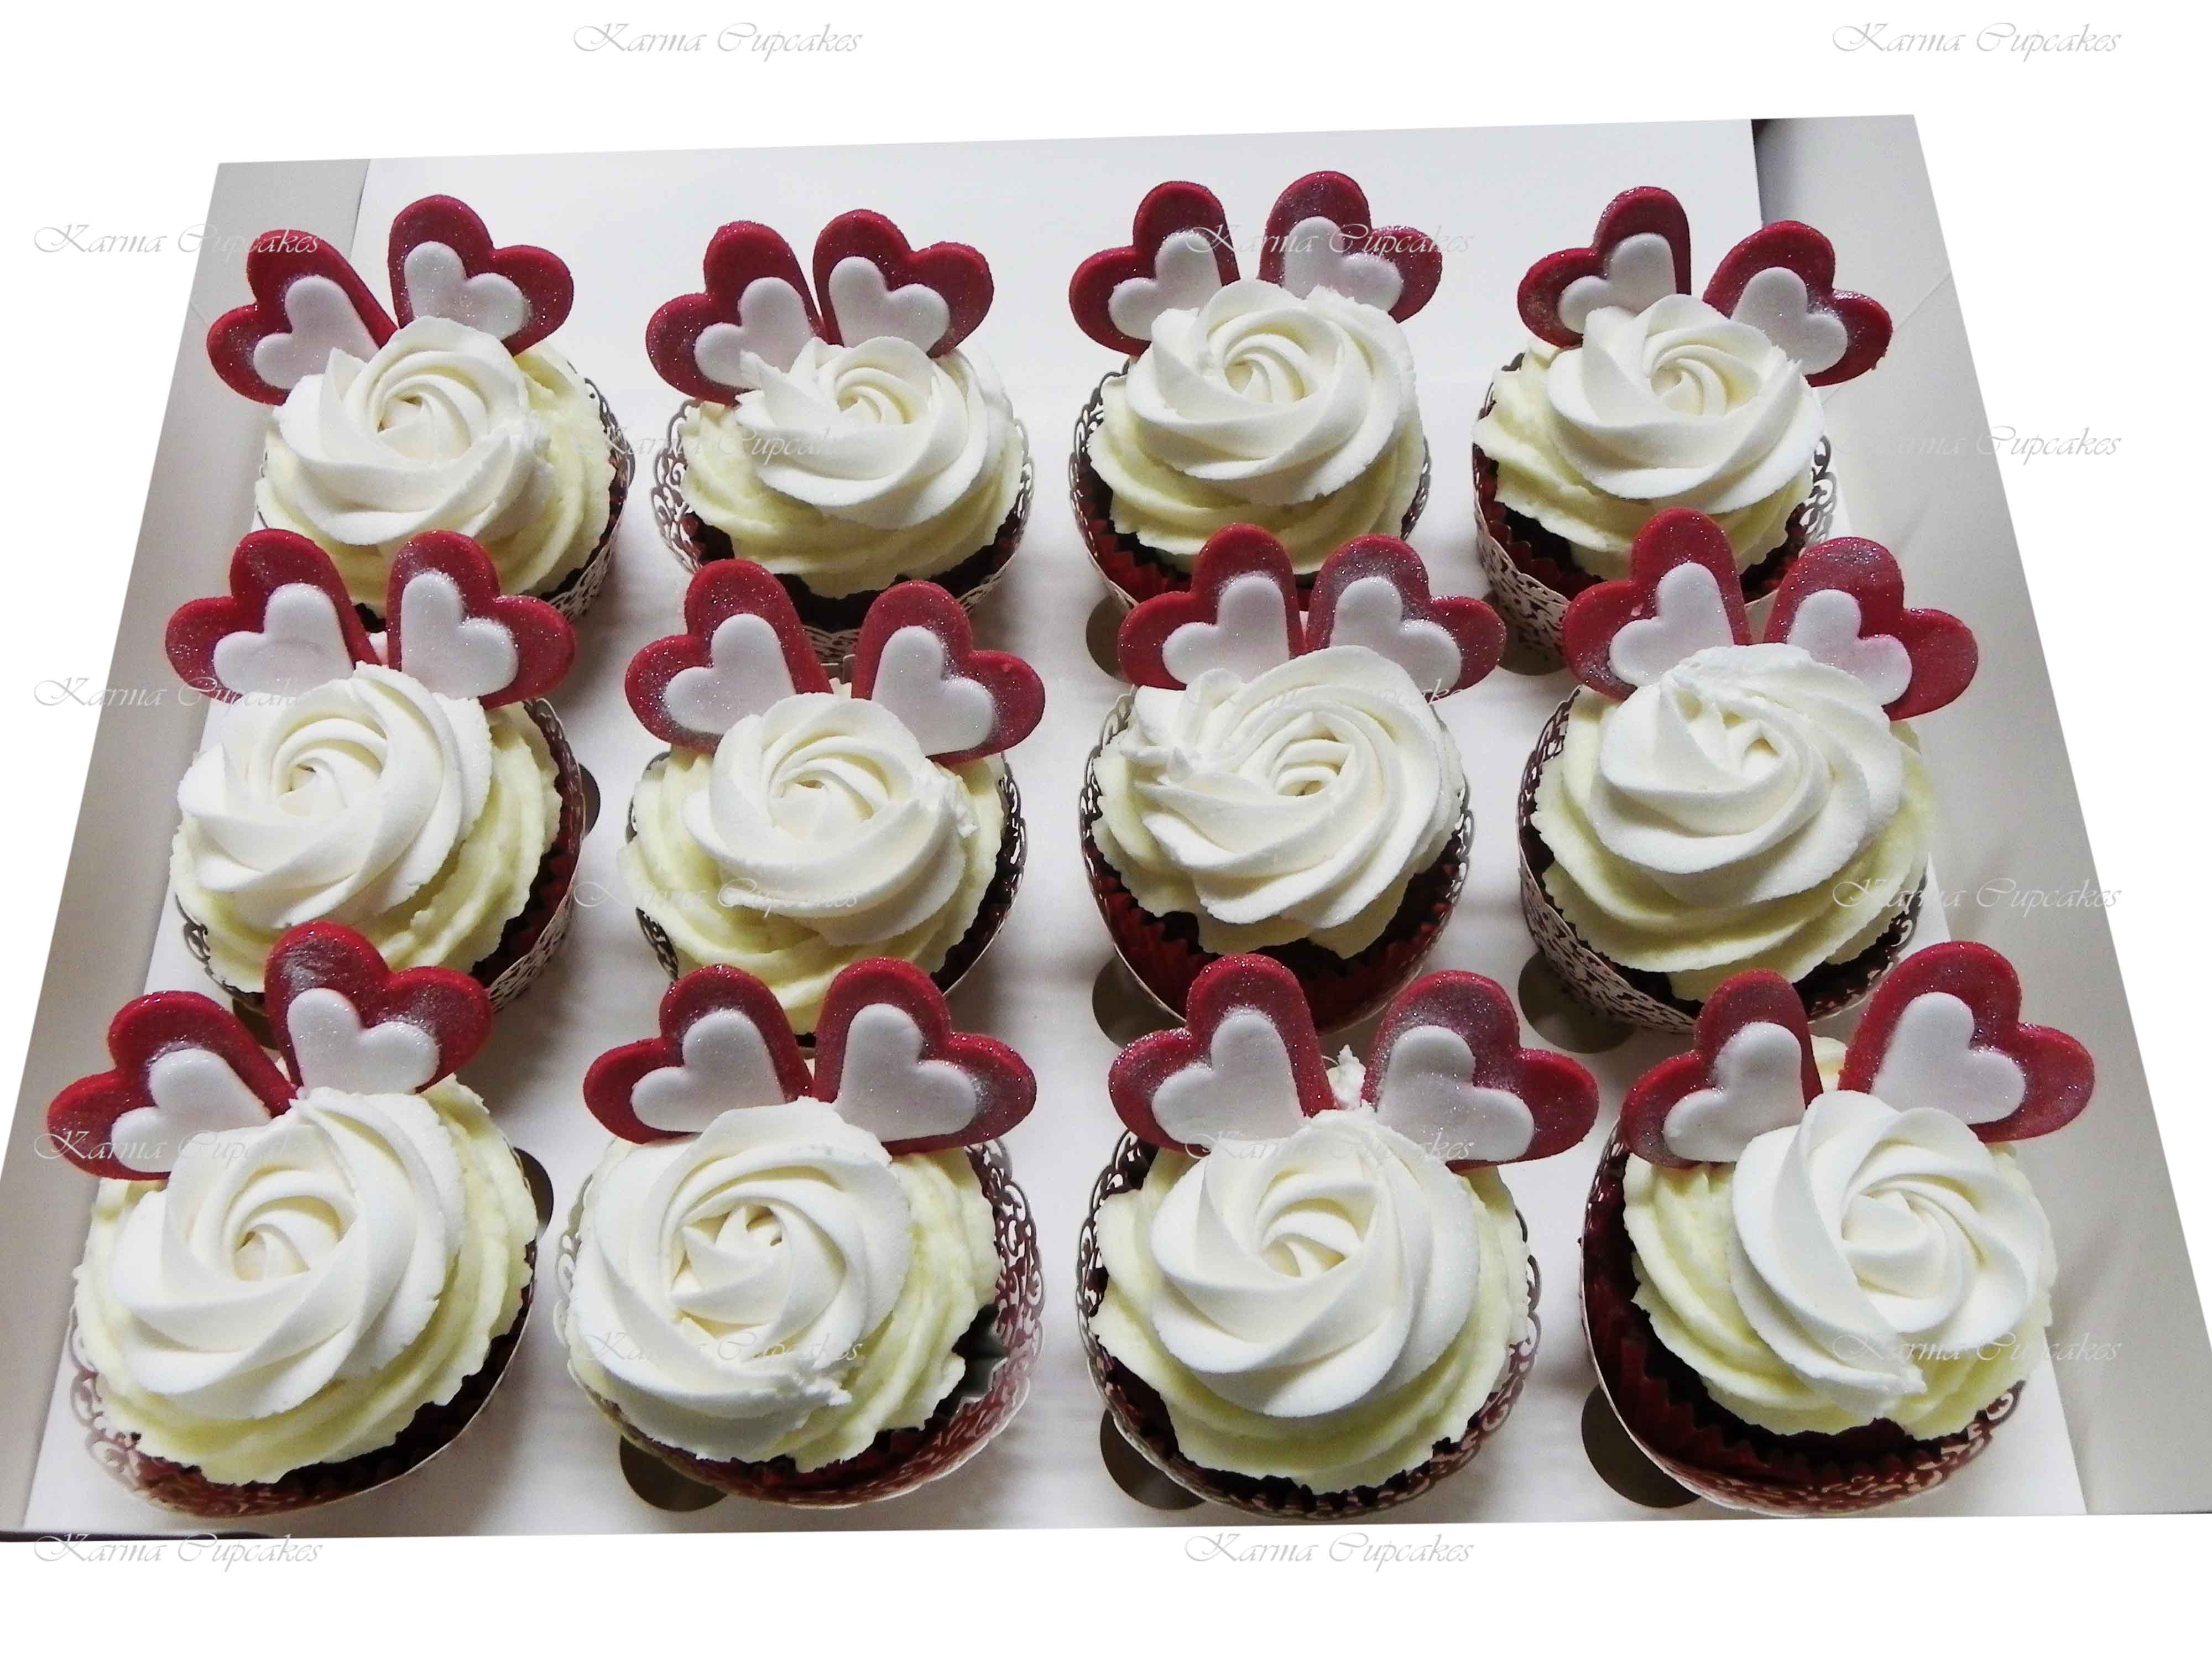 Red velvet cupcakes with a Classic Rose Swirl Cupcakes with Red and White Hearts